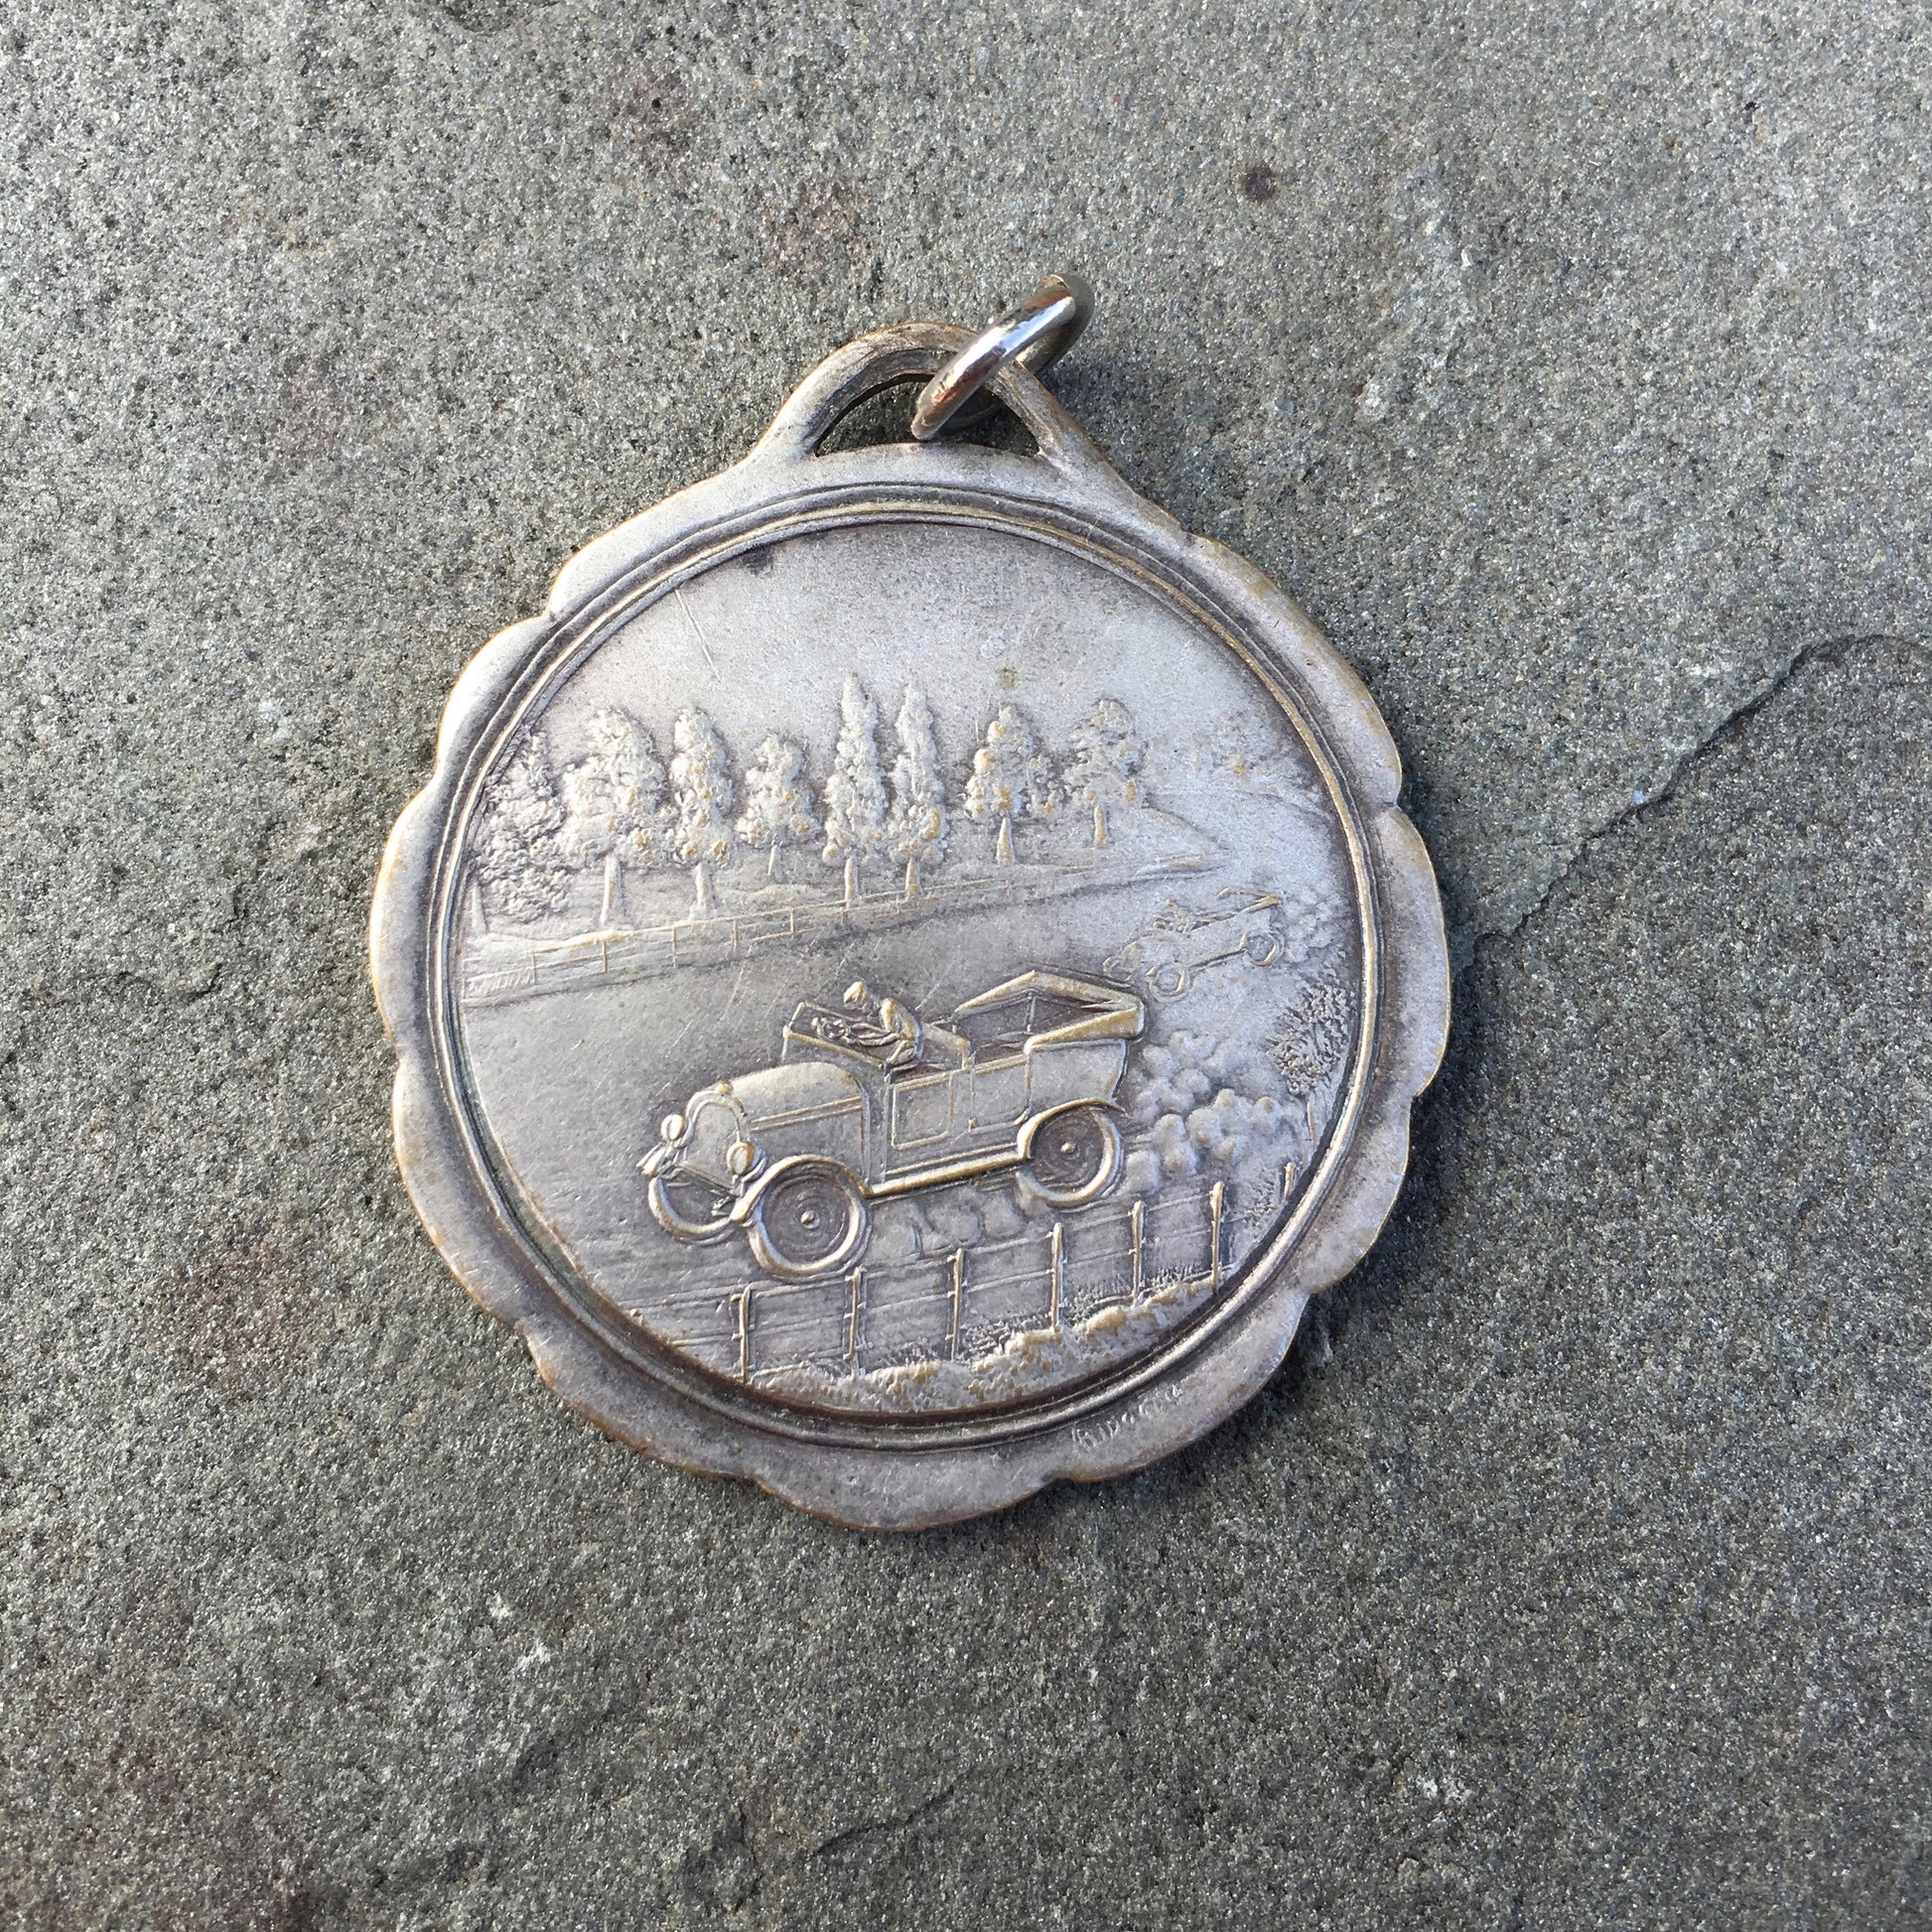 Vintage Antique Silver Racing Scene Pendant Circa Early 1900's - Hashtag Watch Company